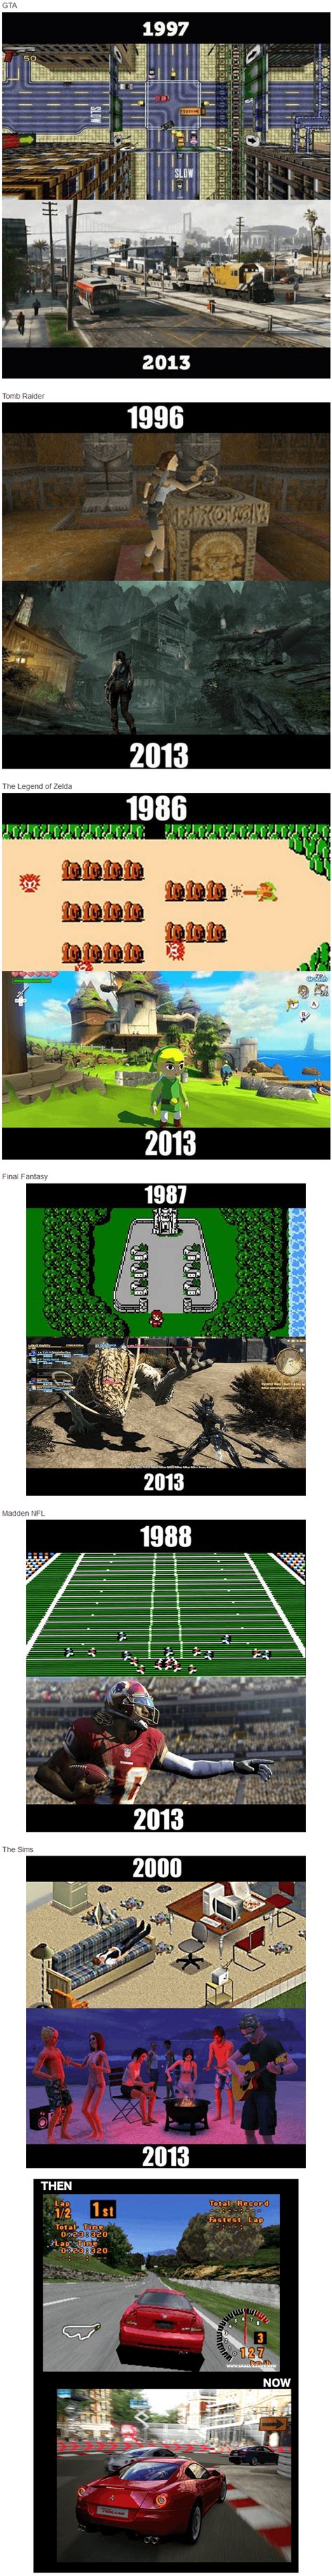 The Amazing Advancement Of Video Games Over Two Decades Image Dottech